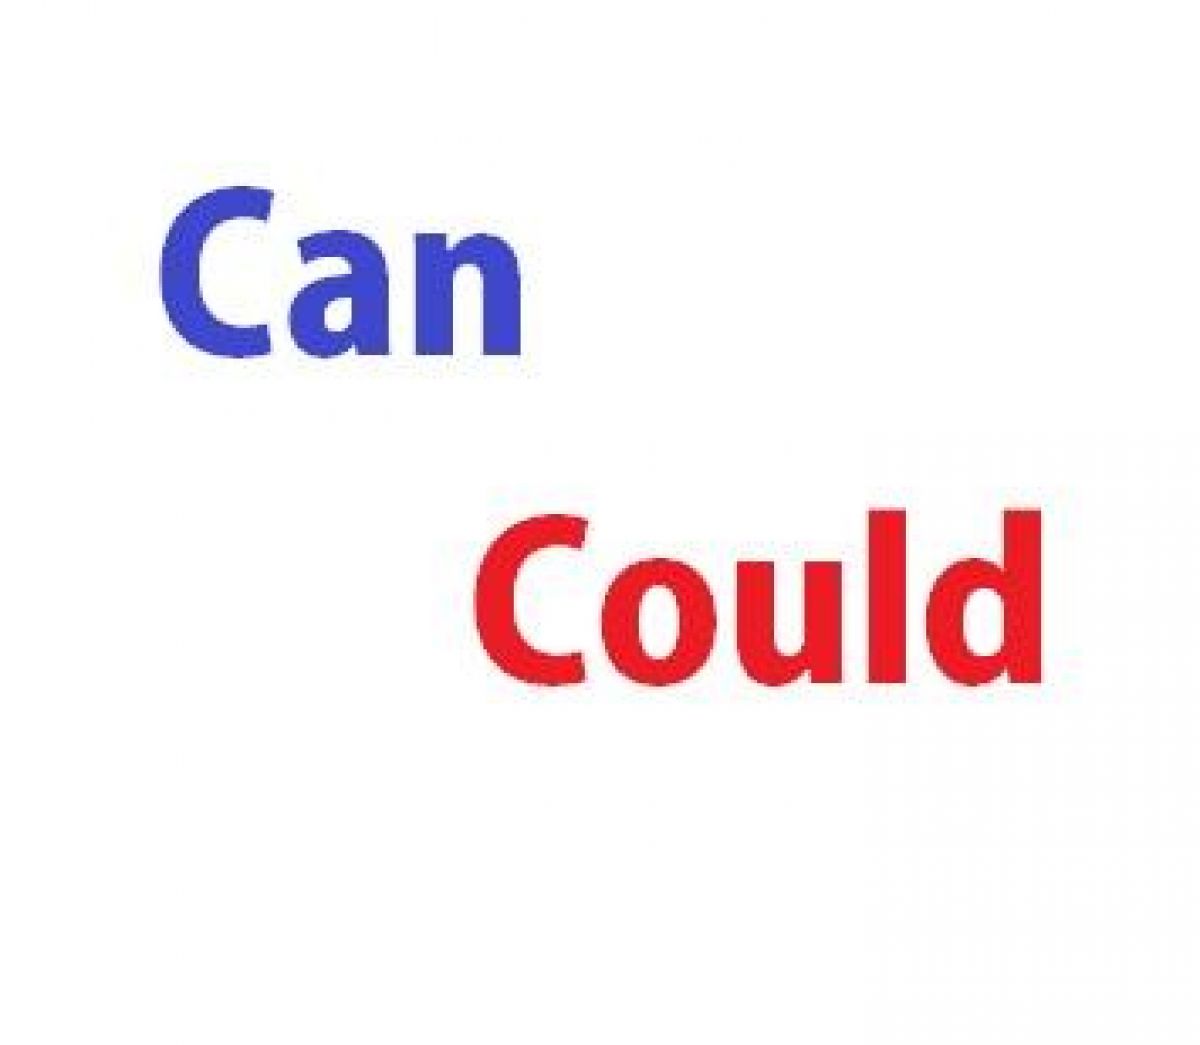 Phân biệt "can", "could", "be able to"